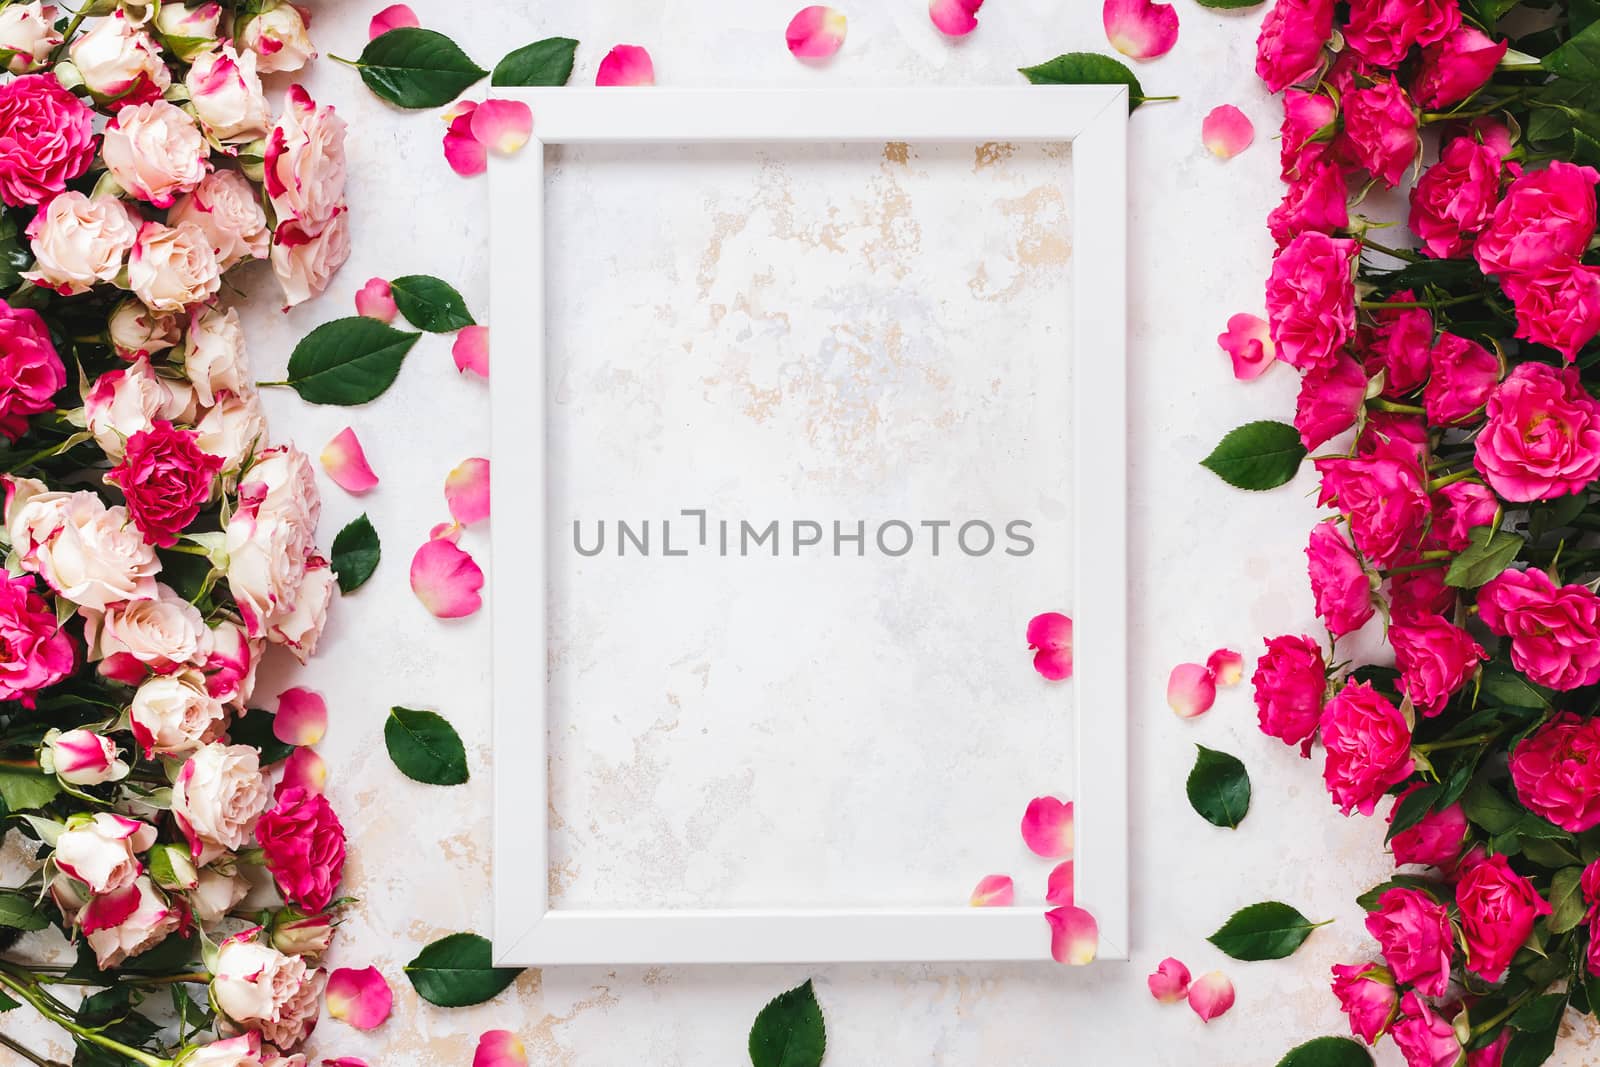 Various brightly colored pink and red roses directed at each other on rustic white and gold surface and empty white wooden frame by Slast20